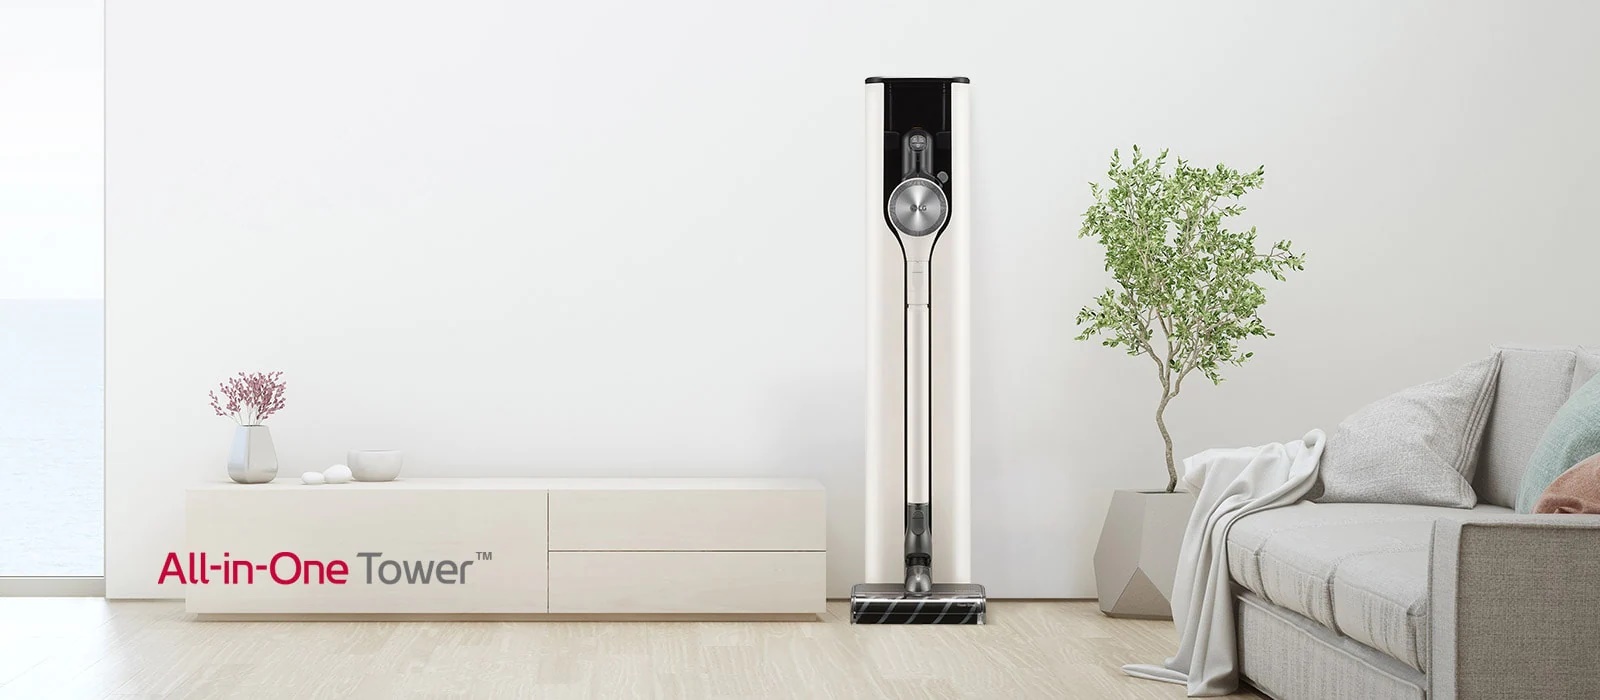 LG CordZero All-in-one Tower